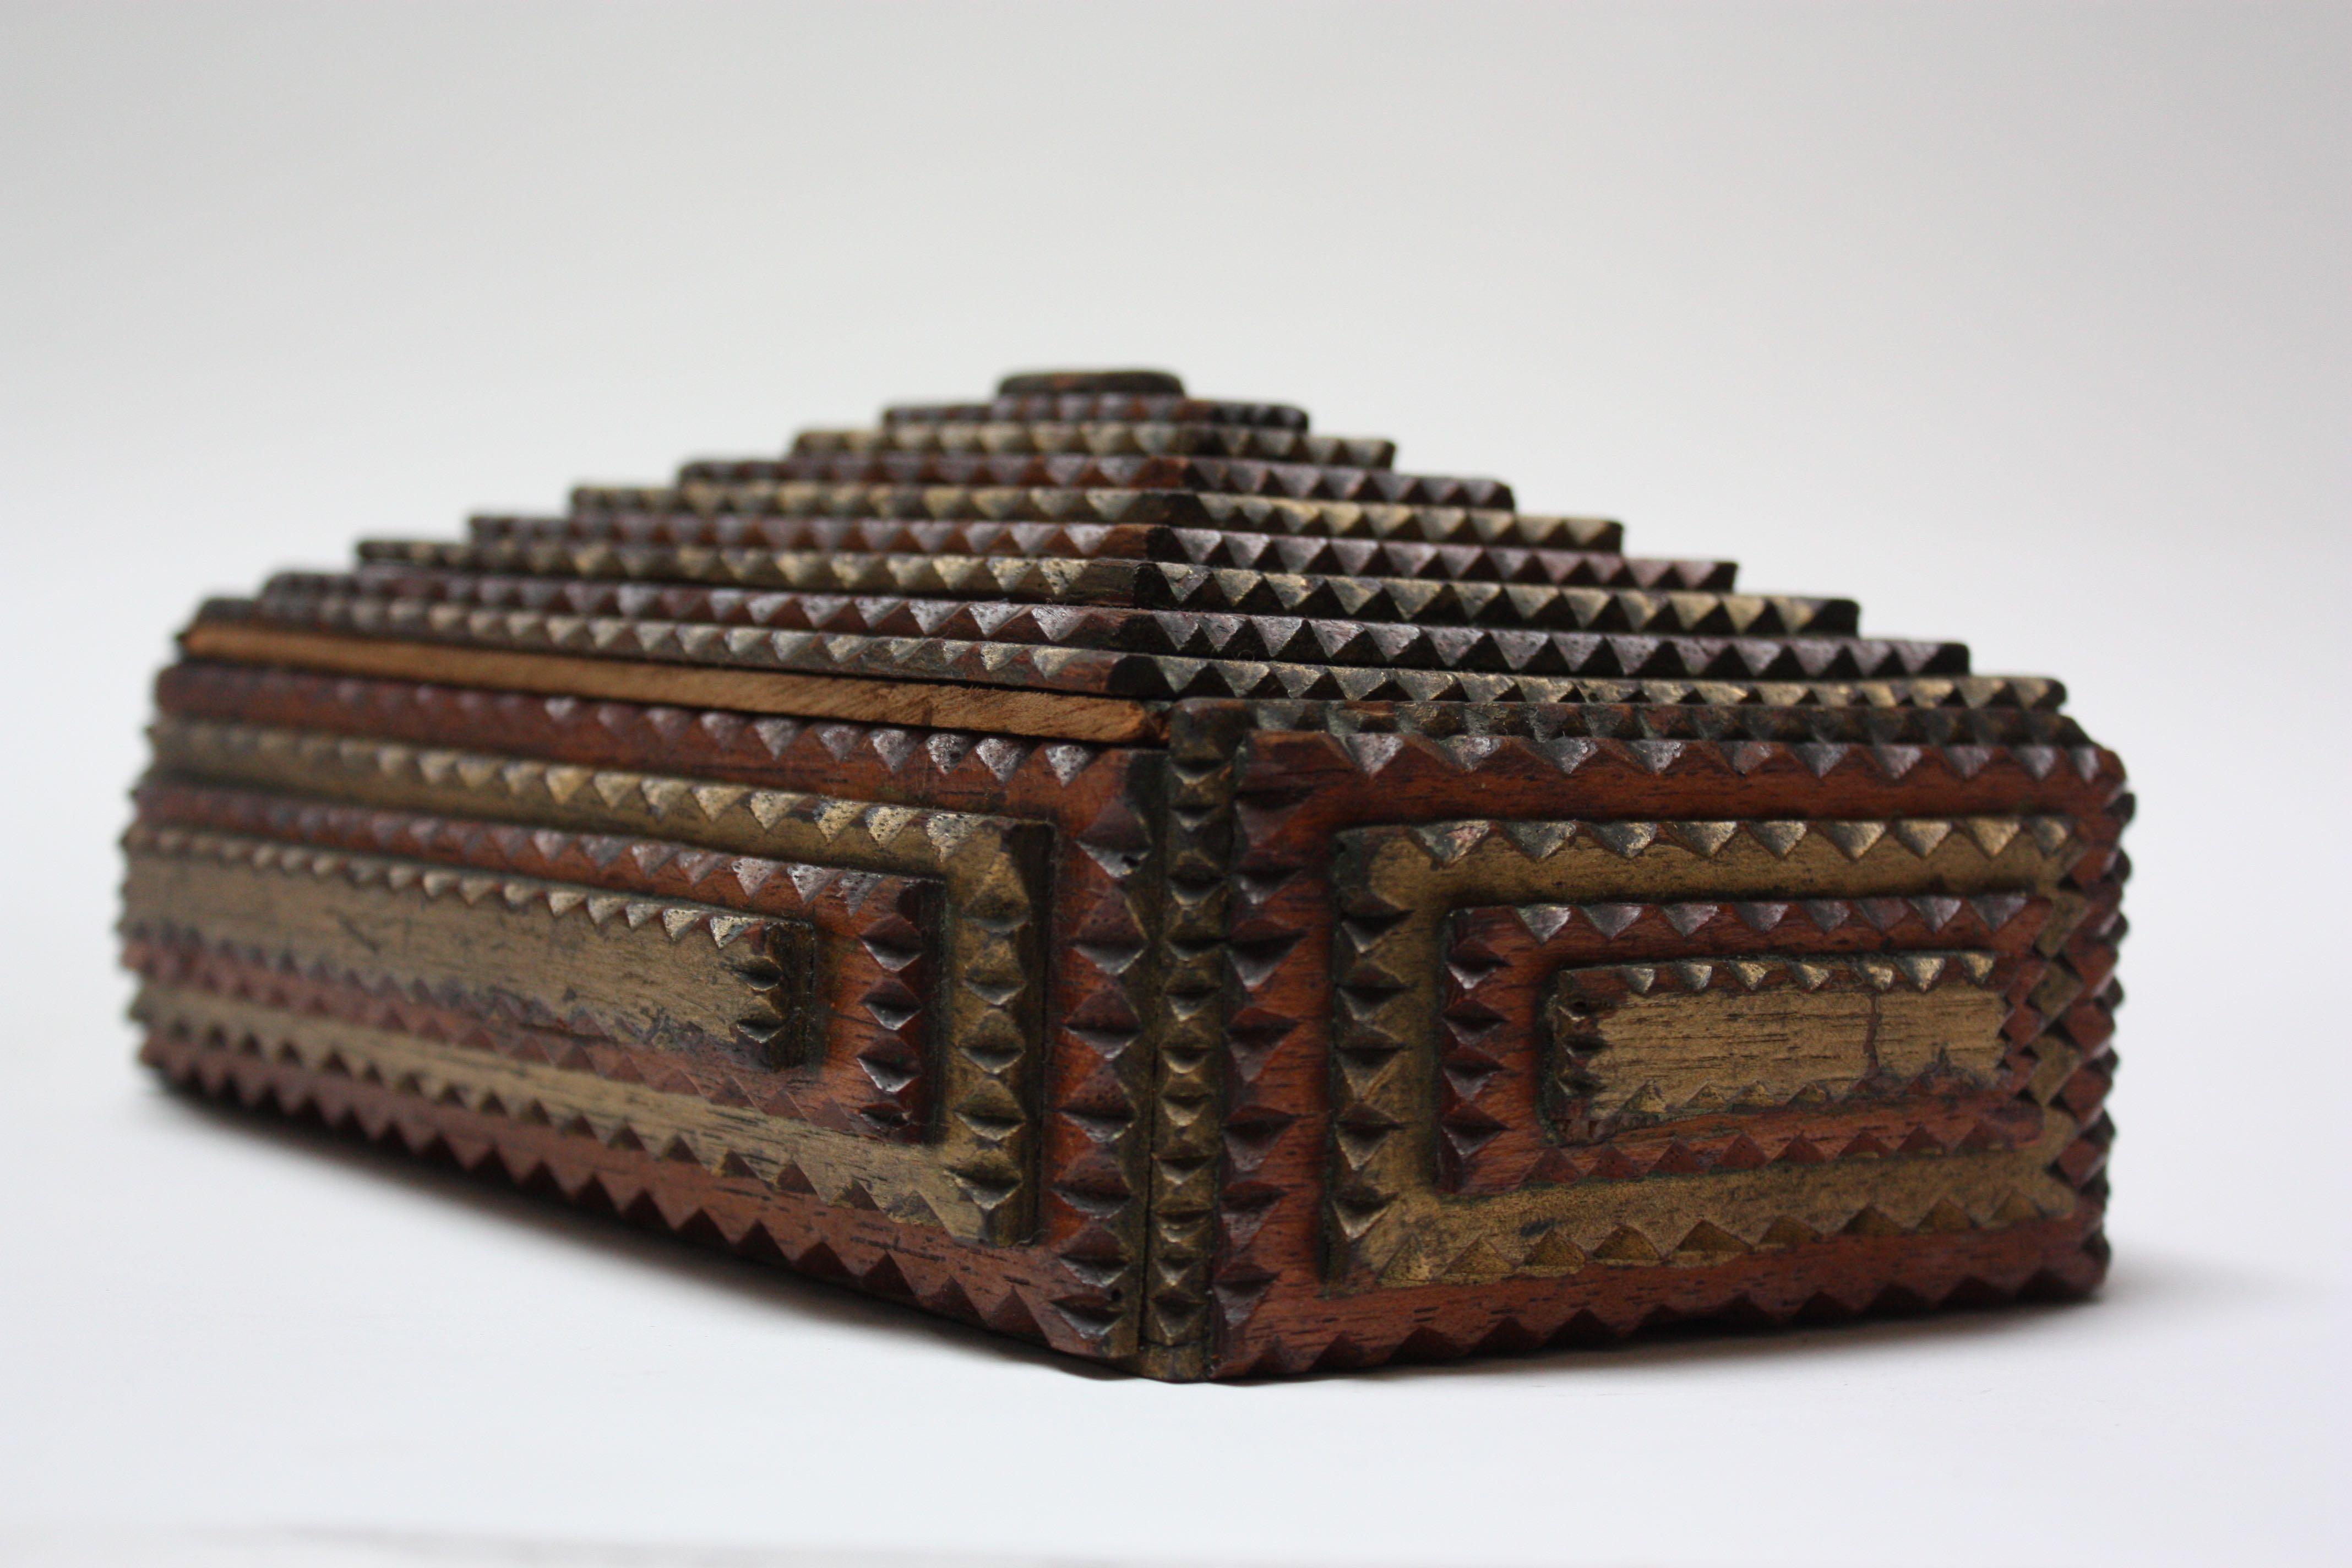 Keepsake American tramp art box (circa 1920-1930) with hand chip-carved wooden decoration in a stepped / pyramidal design. Exterior is in nice condition for its age with the less common hand painted colors, showing only minor paint loss and